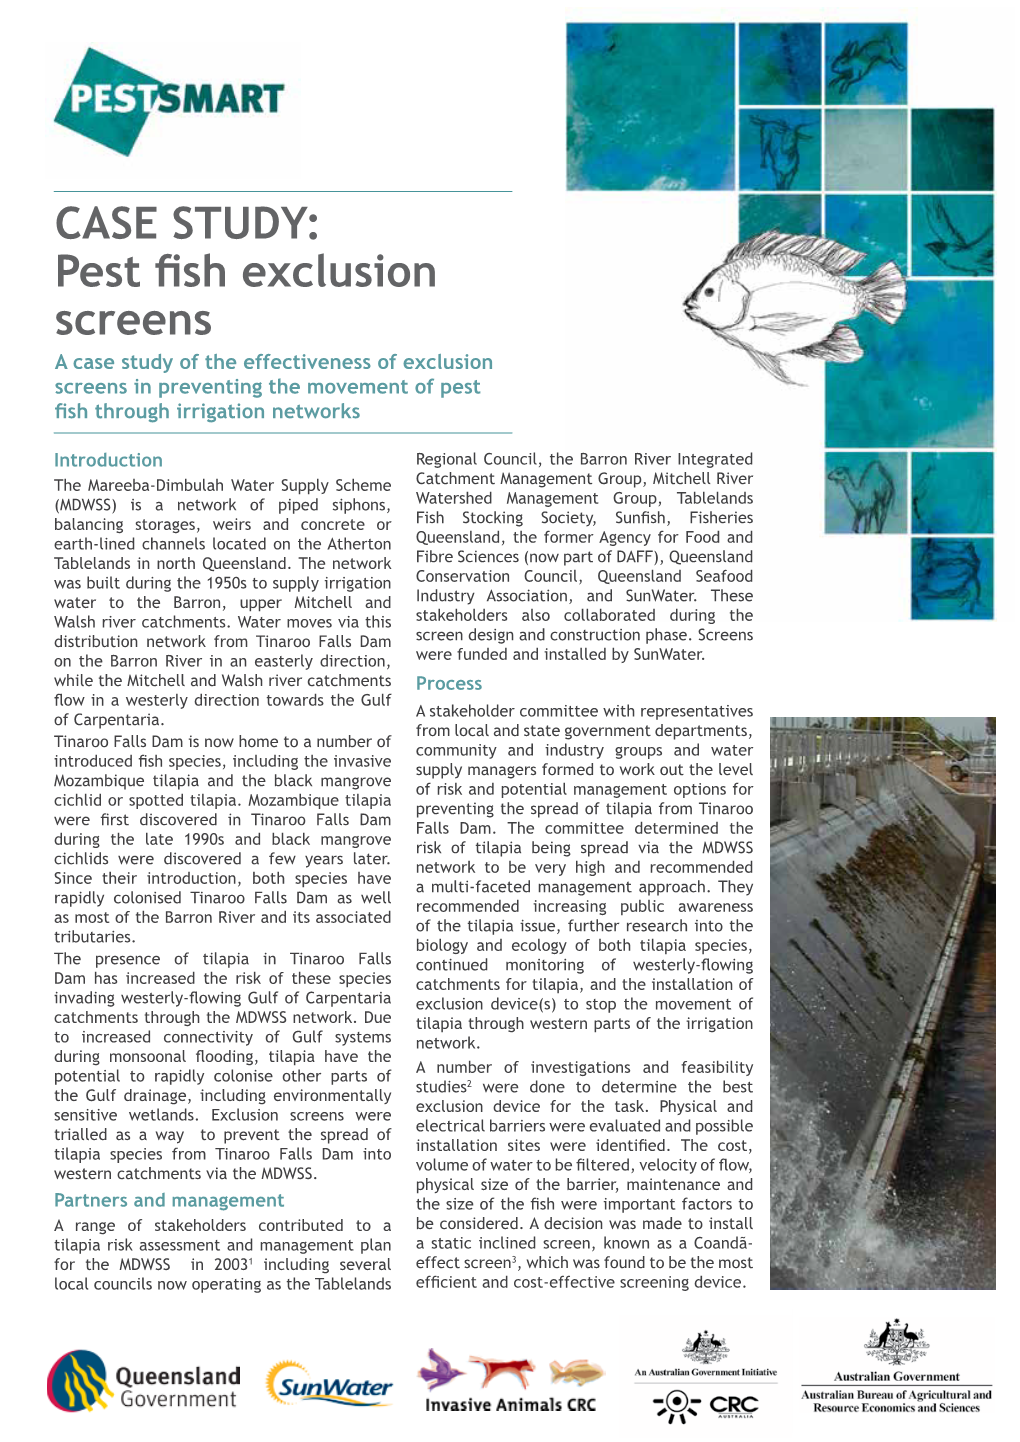 Pest Fish Exclusion Screens a Case Study of the Effectiveness of Exclusion Screens in Preventing the Movement of Pest Fish Through Irrigation Networks